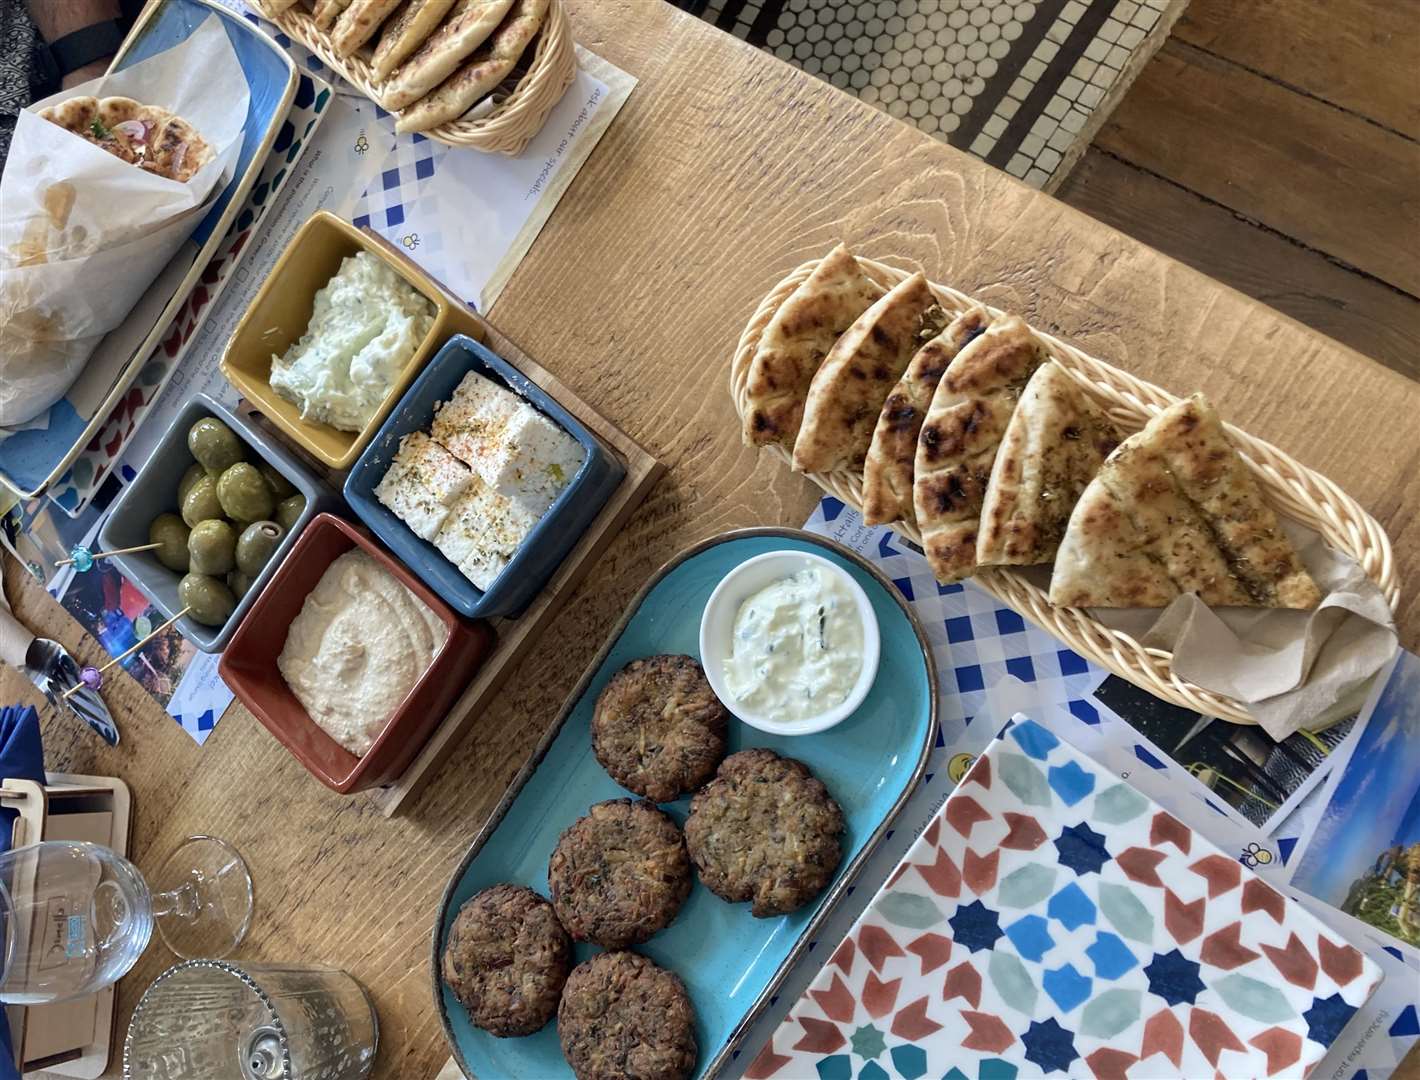 A spread fit for a mythical King